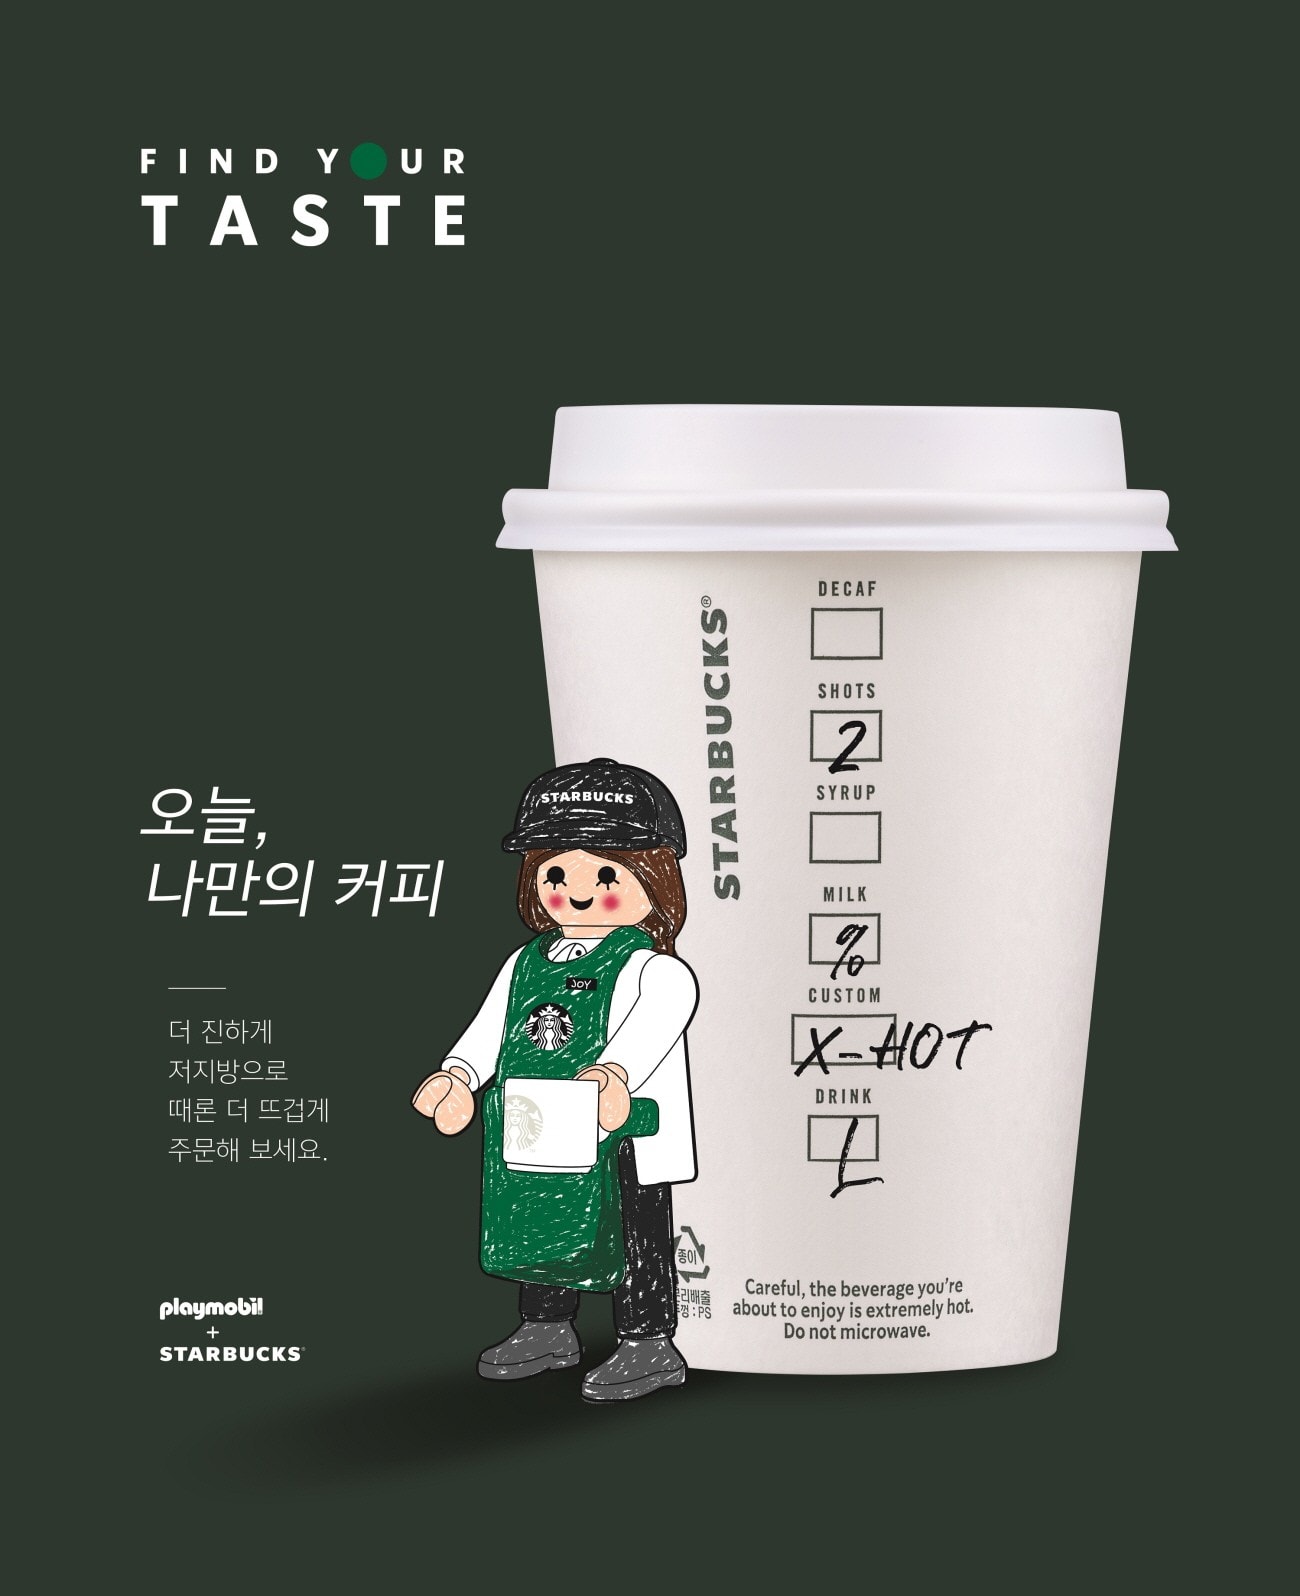 starbucks korea playmobil collaboration special edition figures toys coffee cup takeout illustration